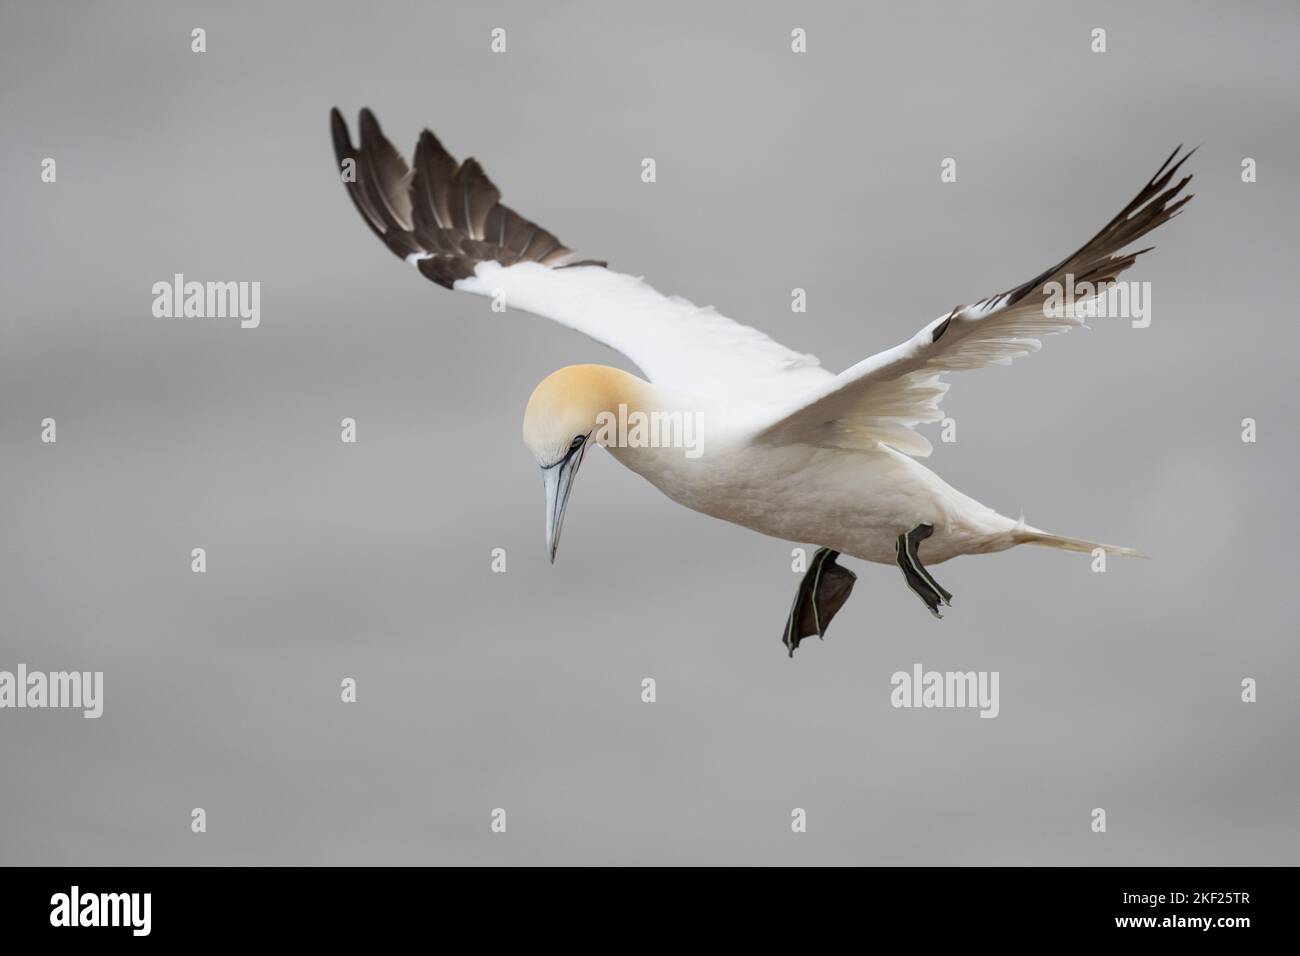 Northern Gannet Morus bassanus, an adult bird hangs in the air using wind updrafts from a cliff, Yorkshire, UK, September Stock Photo